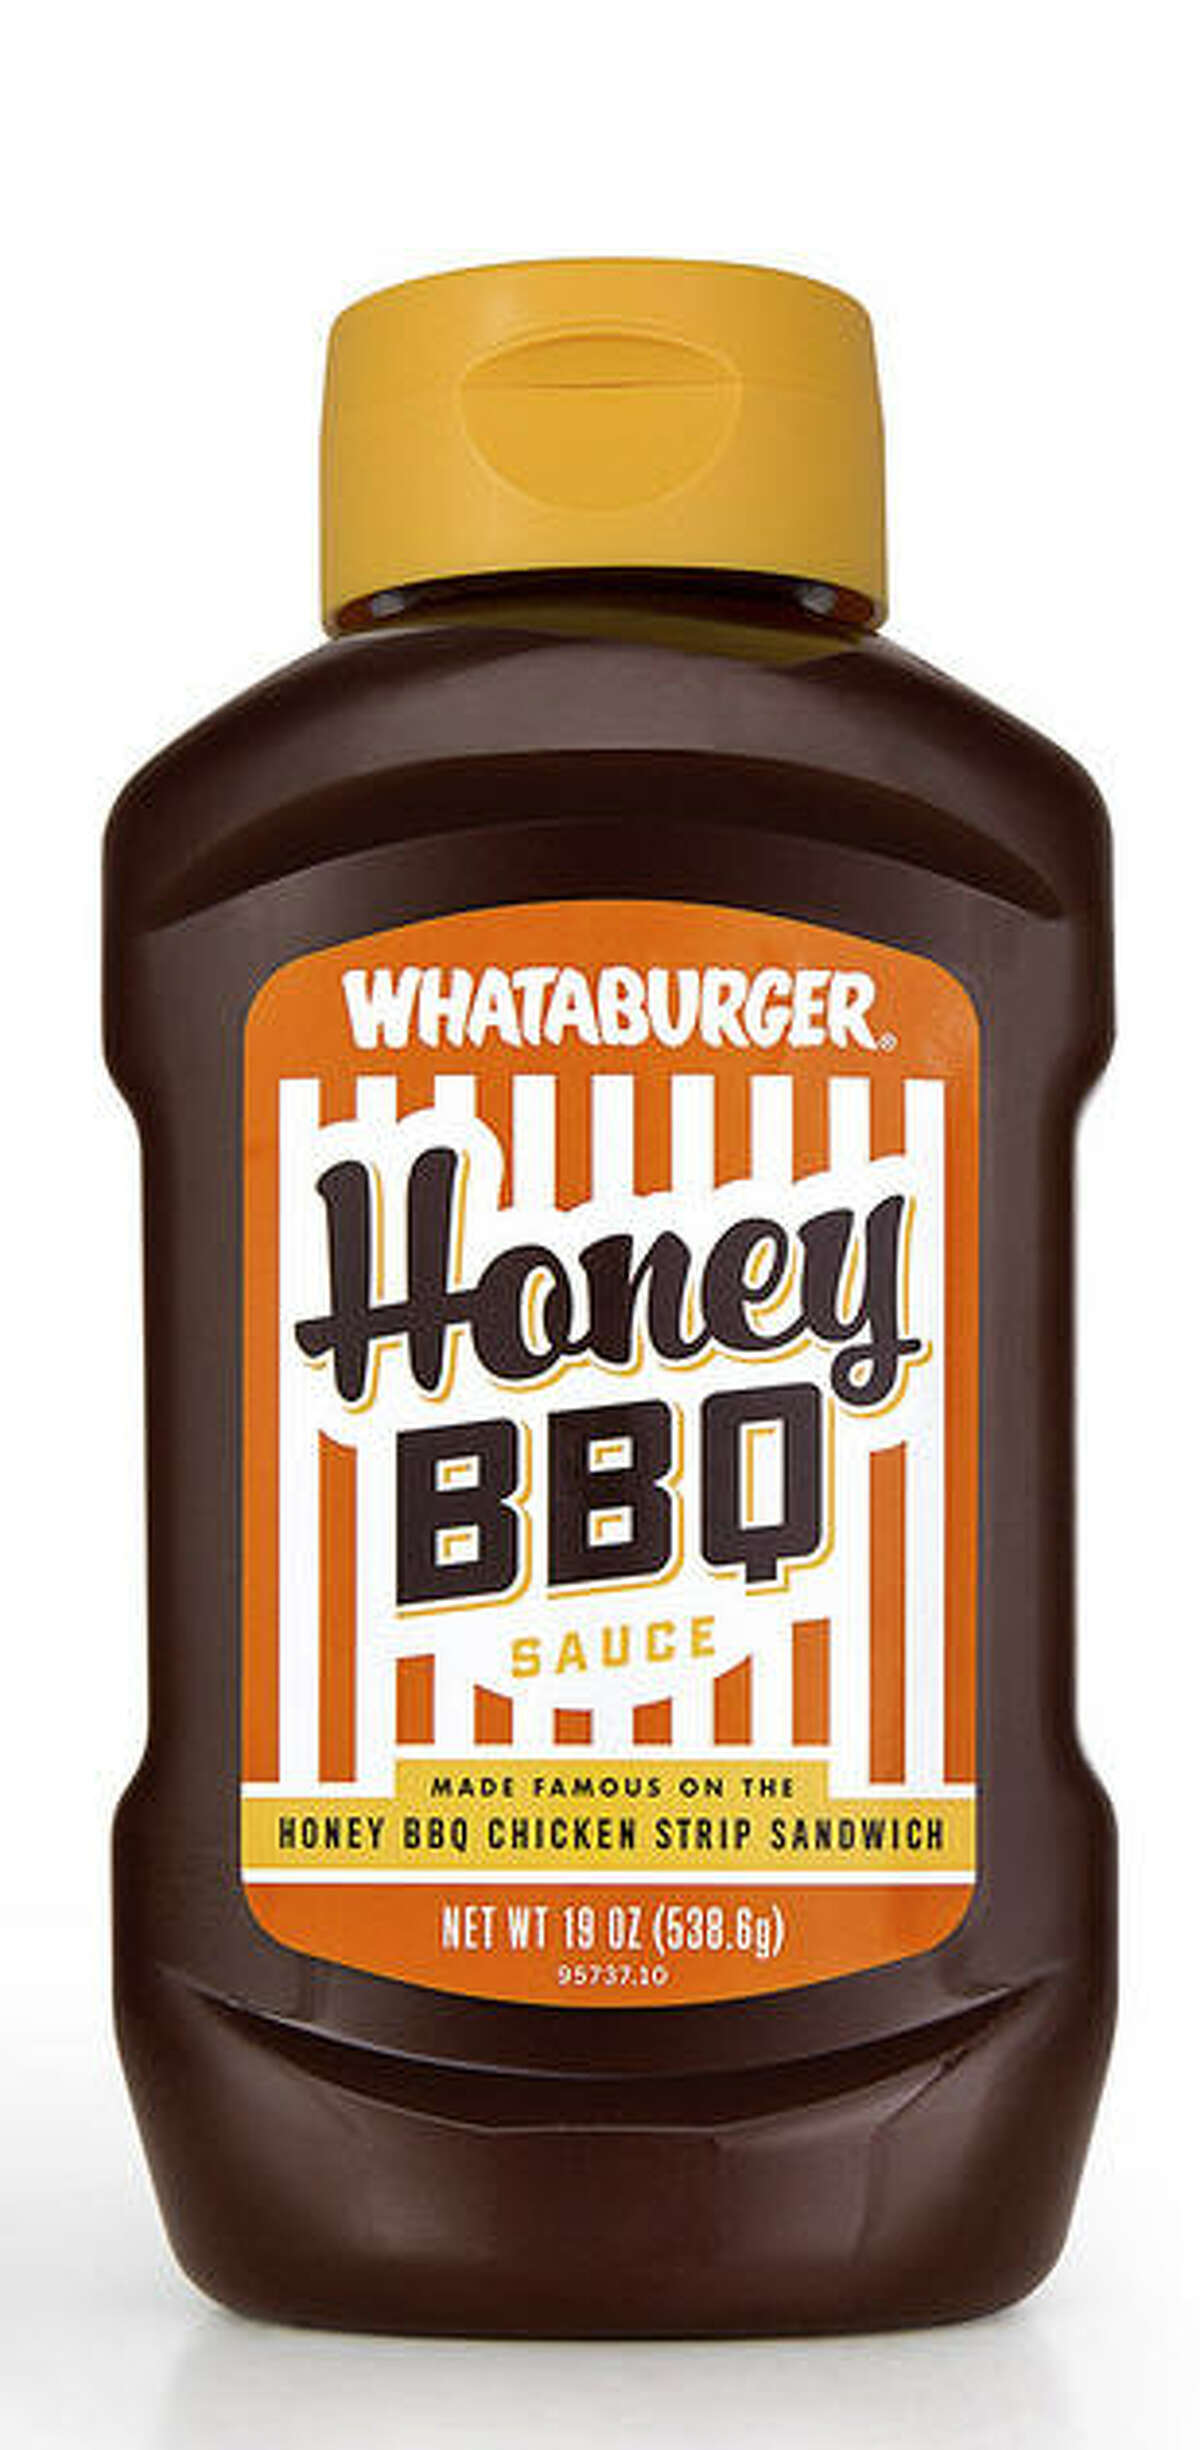 Whataburger Honey BBQ Sauce Available in H-E-B stores statewide (added Feb. 9, 2015). Whataburger says: "A unique blend of savory, sticky sweet goodness, this sauce was made famous on Whataburger’s Honey BBQ Chicken Strip Sandwich, and is great on chicken, beef or any other grill-worthy favorites."